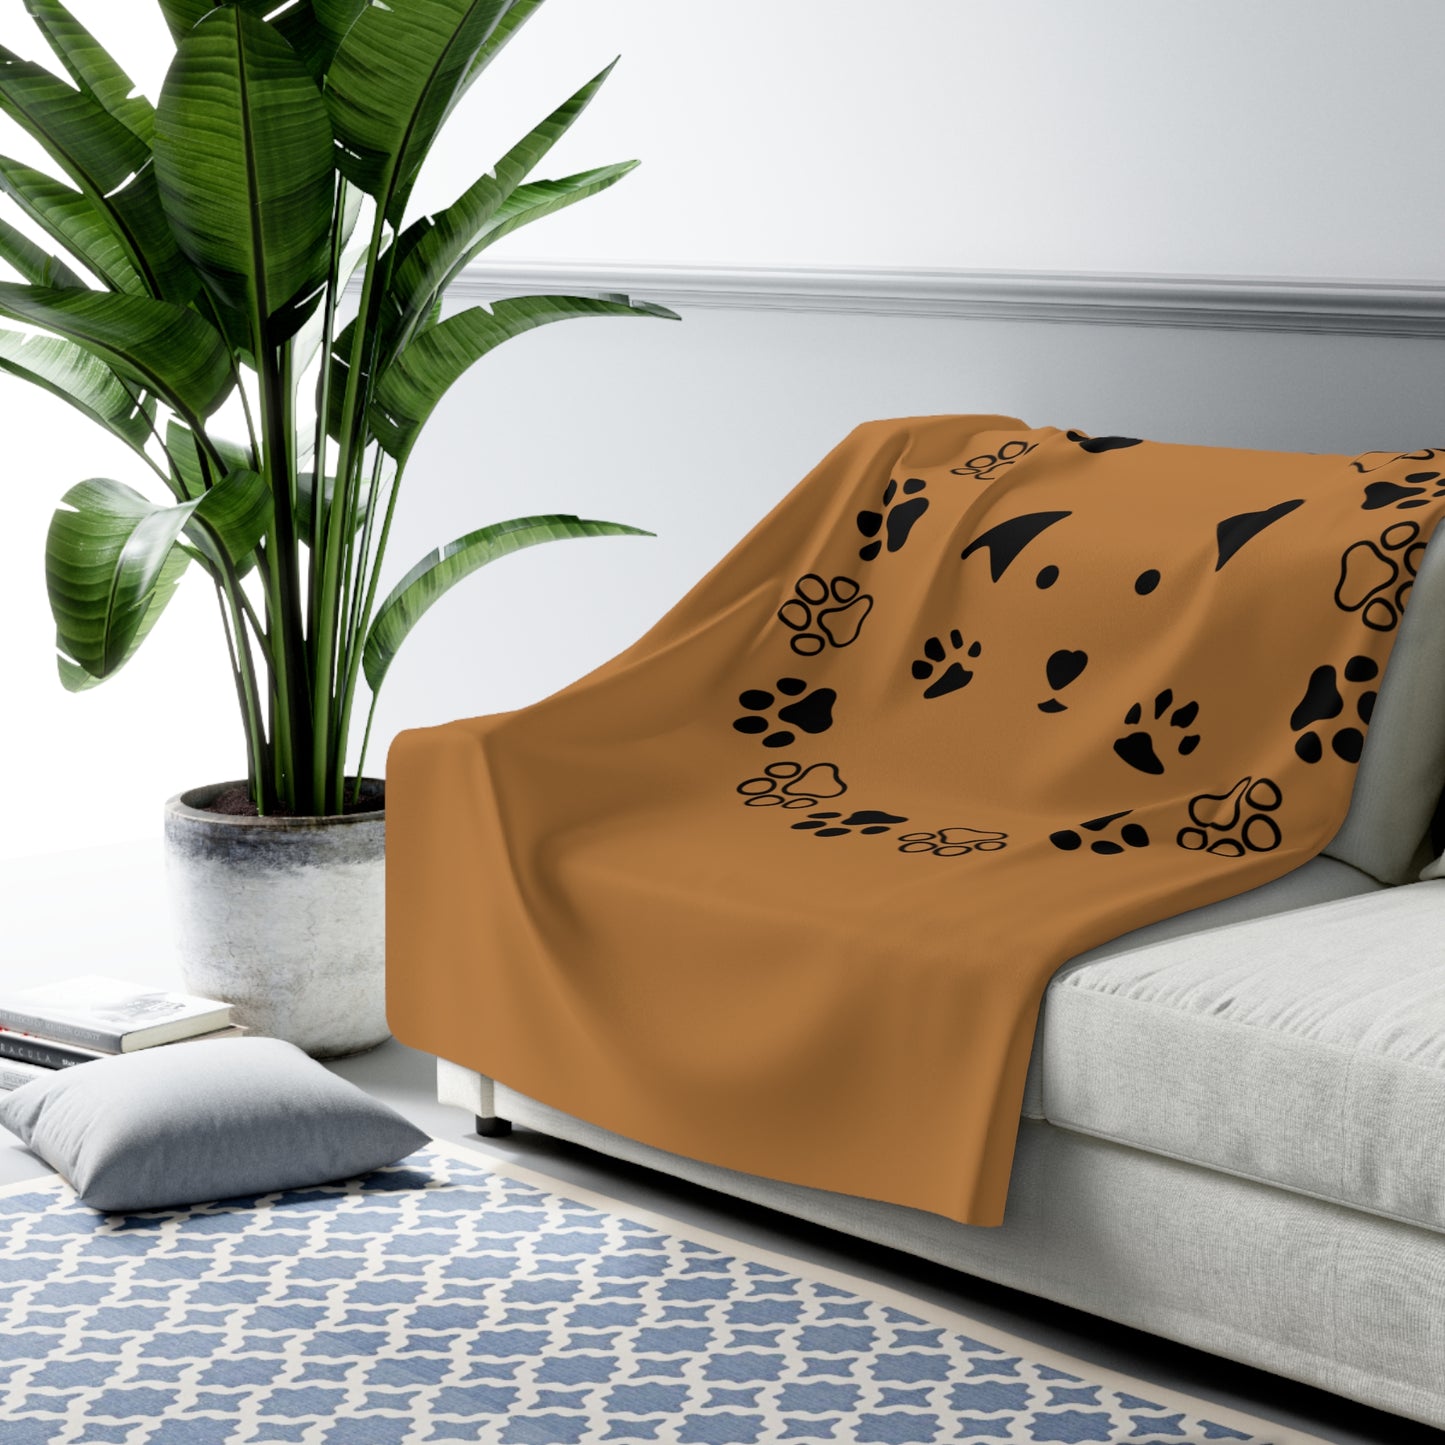 LUXURIOUS COZY BLANKET: THE EPITOME OF COMFORT AND WARMTH | Dog light brown